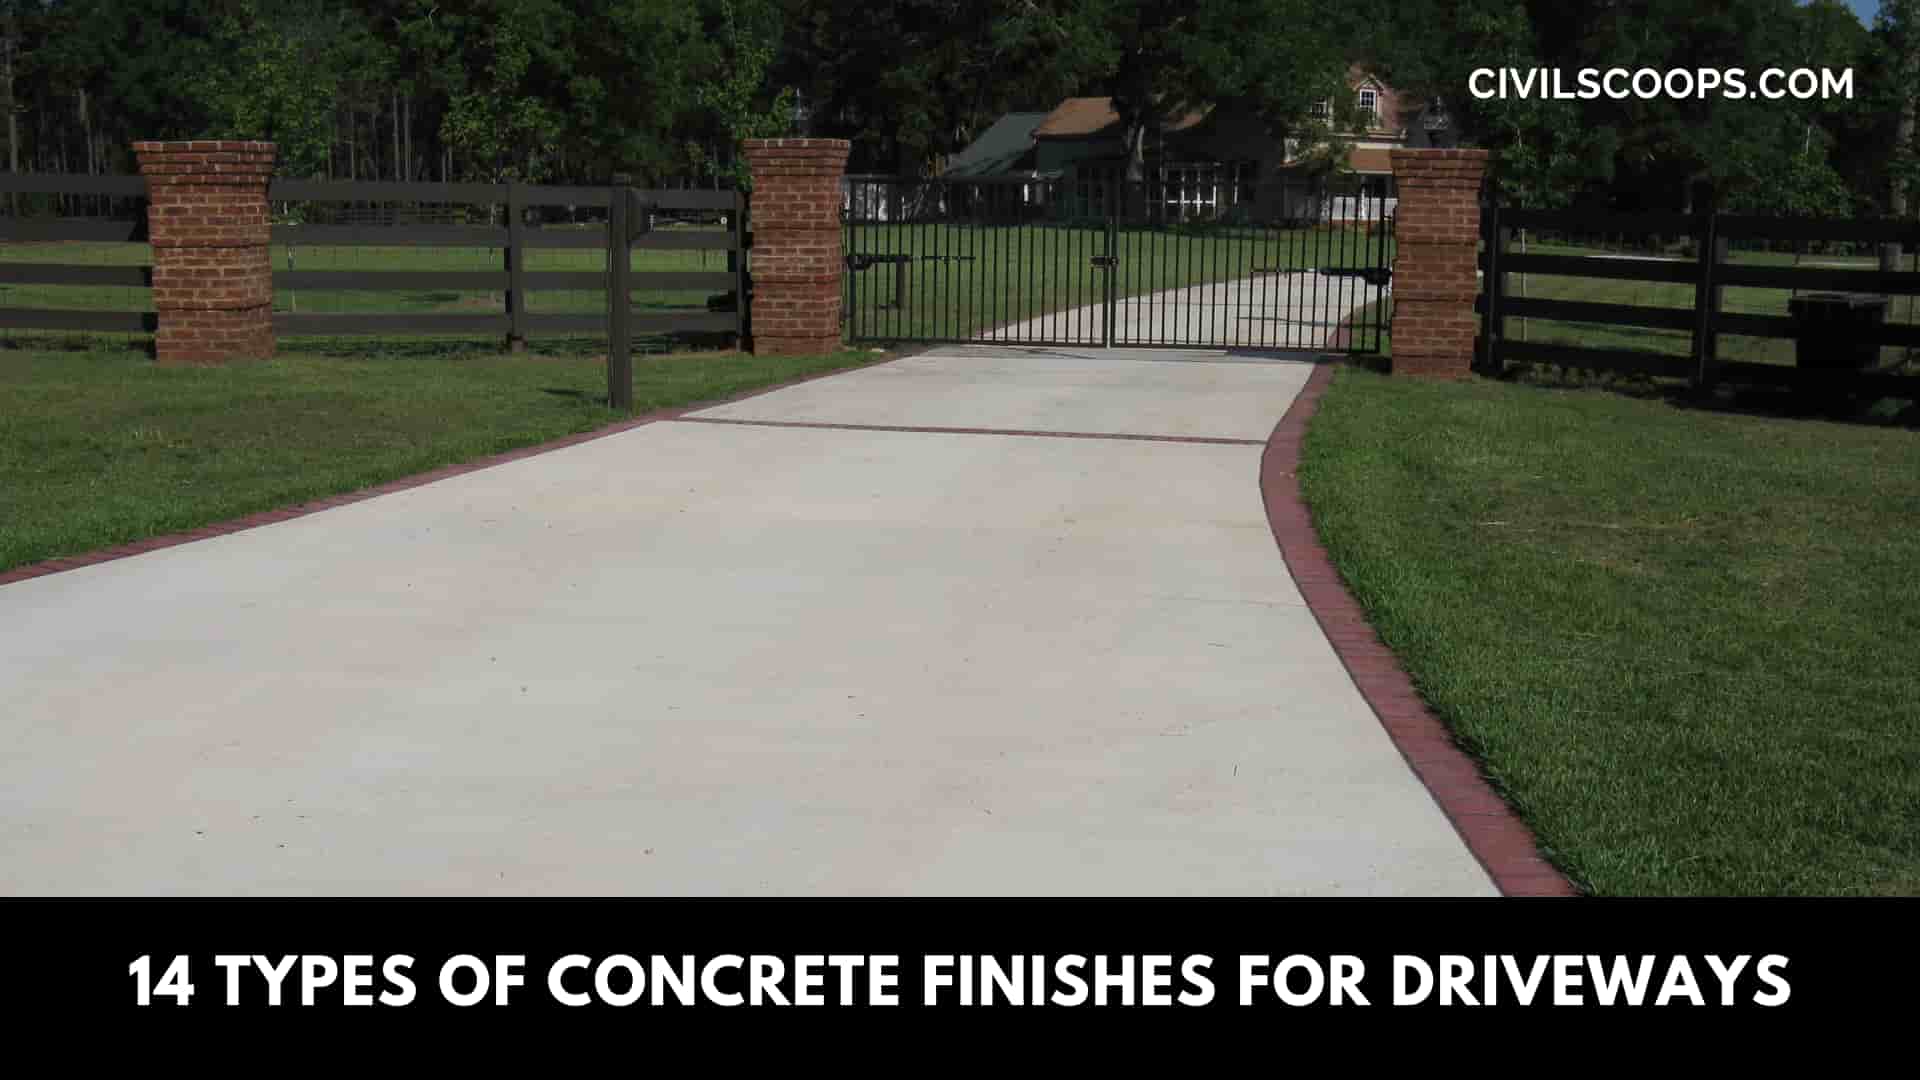 14 Types of Concrete Finishes for Driveways